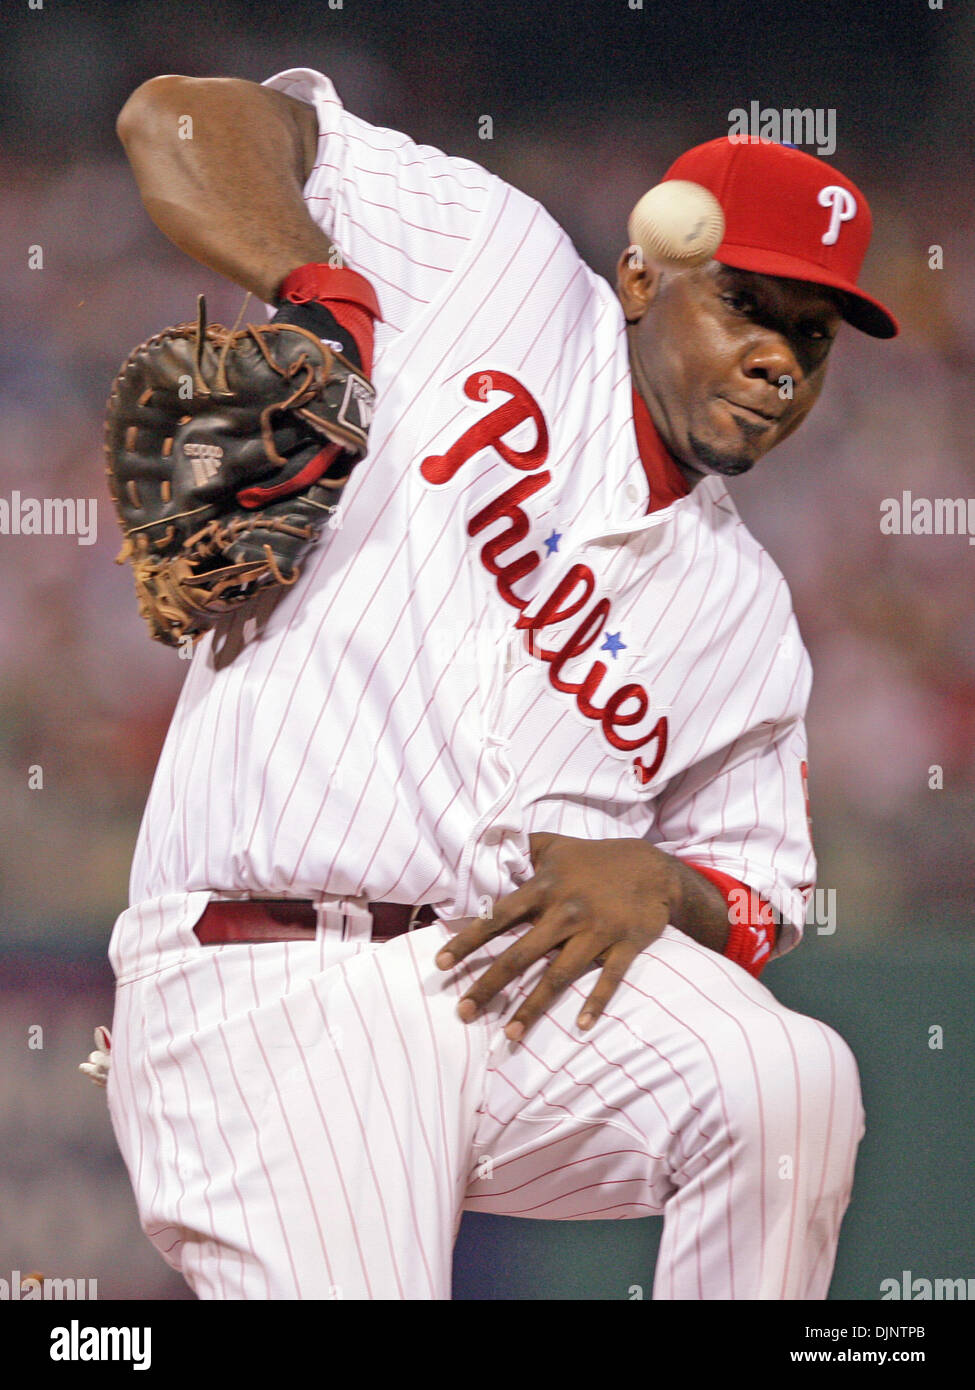 Oct 09, 2008 - Philadelphia, Pennsylvania, USA - RYAN HOWARD misses the handle on an infield single from Andre Either in Game 1 of the NLCS at Citizens Bank Park. (Credit Image: © Yong Kim/Philadelphia DailyNews/ZUMA Press) Stock Photo